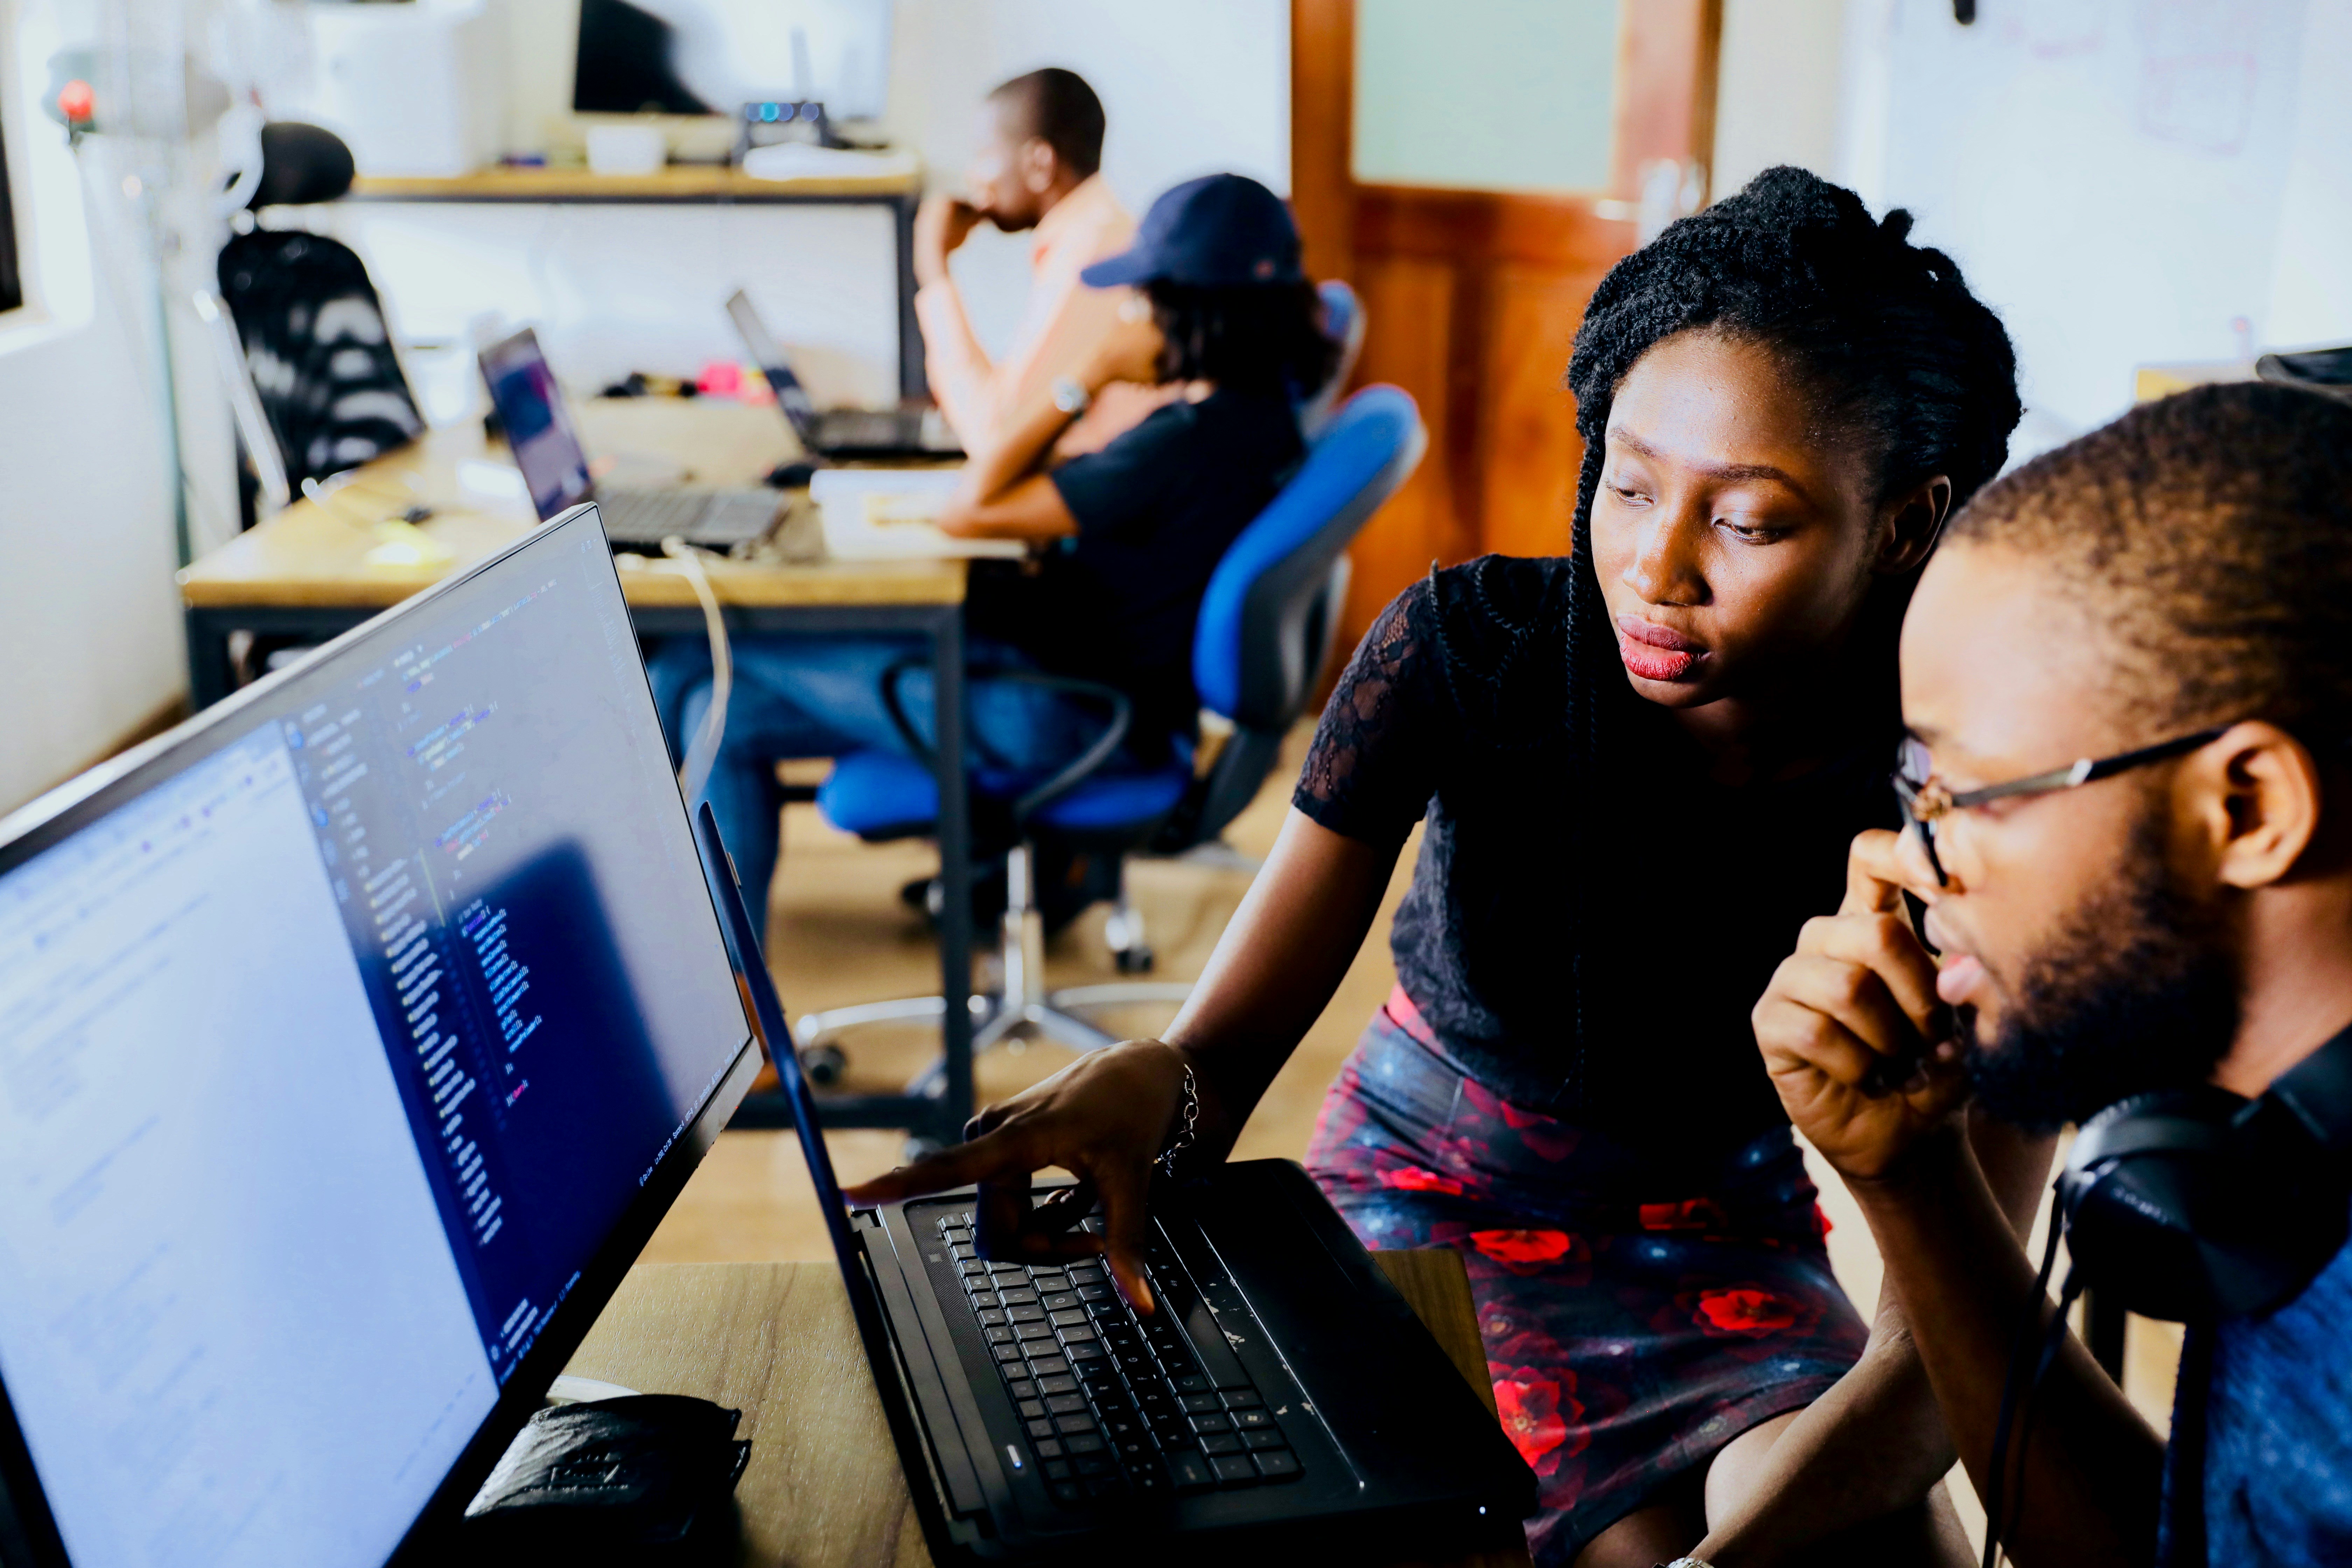 Photo by Desola Lanre-Ologun on Unsplash of two employees at a startup incubator